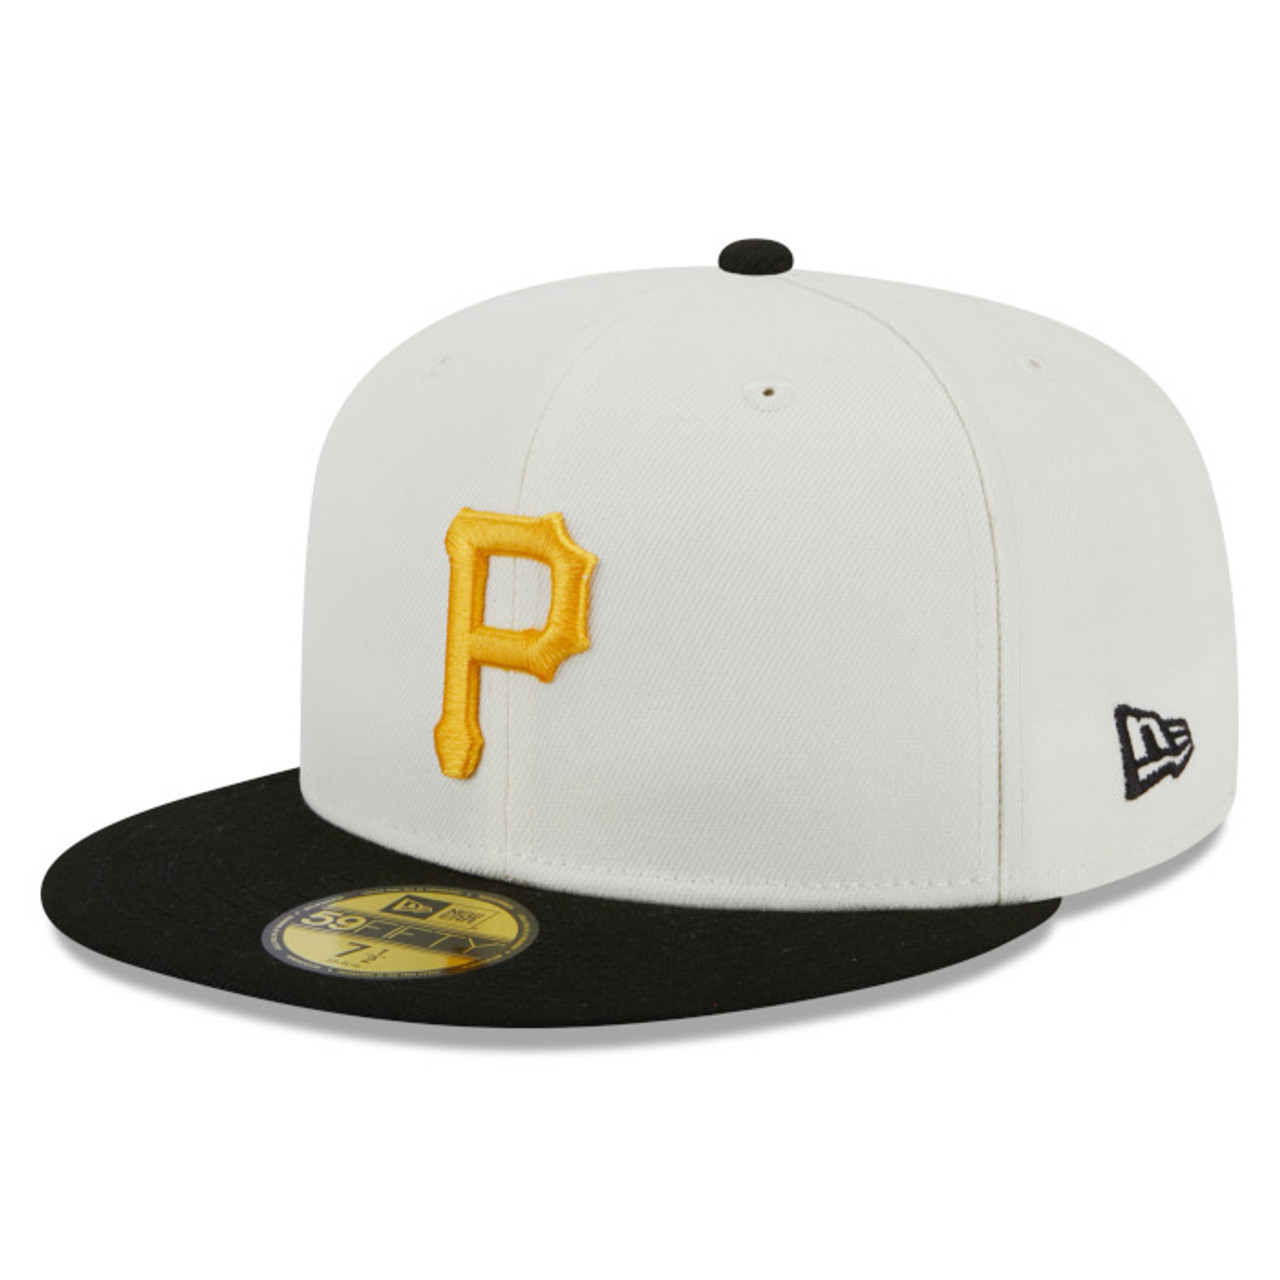 Official Pittsburgh Pirates Gear, Pirates Jerseys, Store